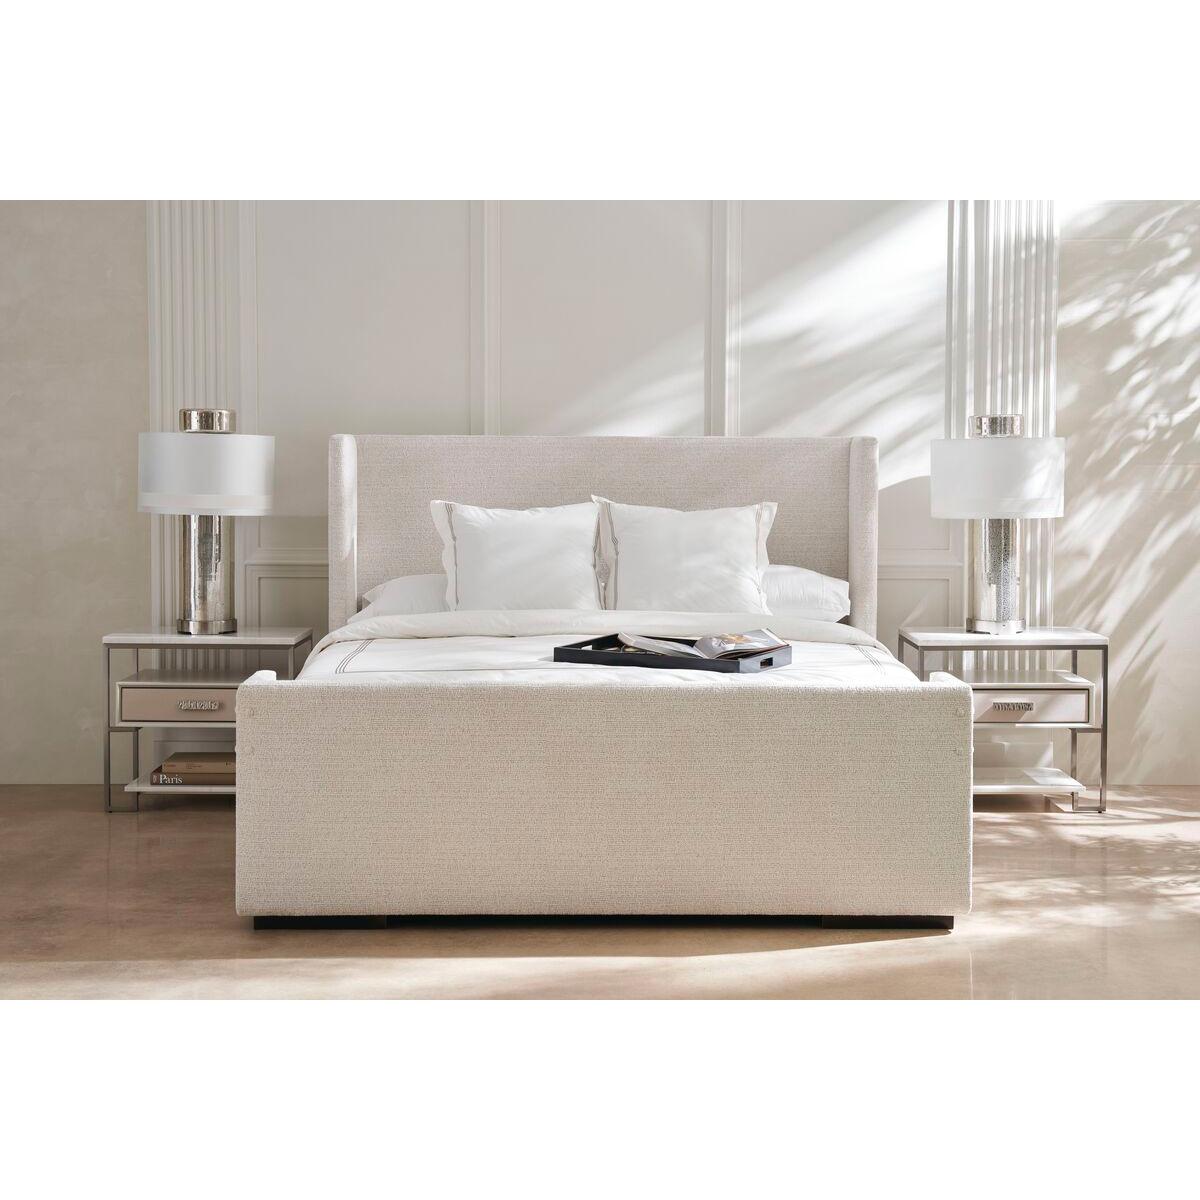 Contemporary Upholstered Queen Size Minimalist Bed For Sale